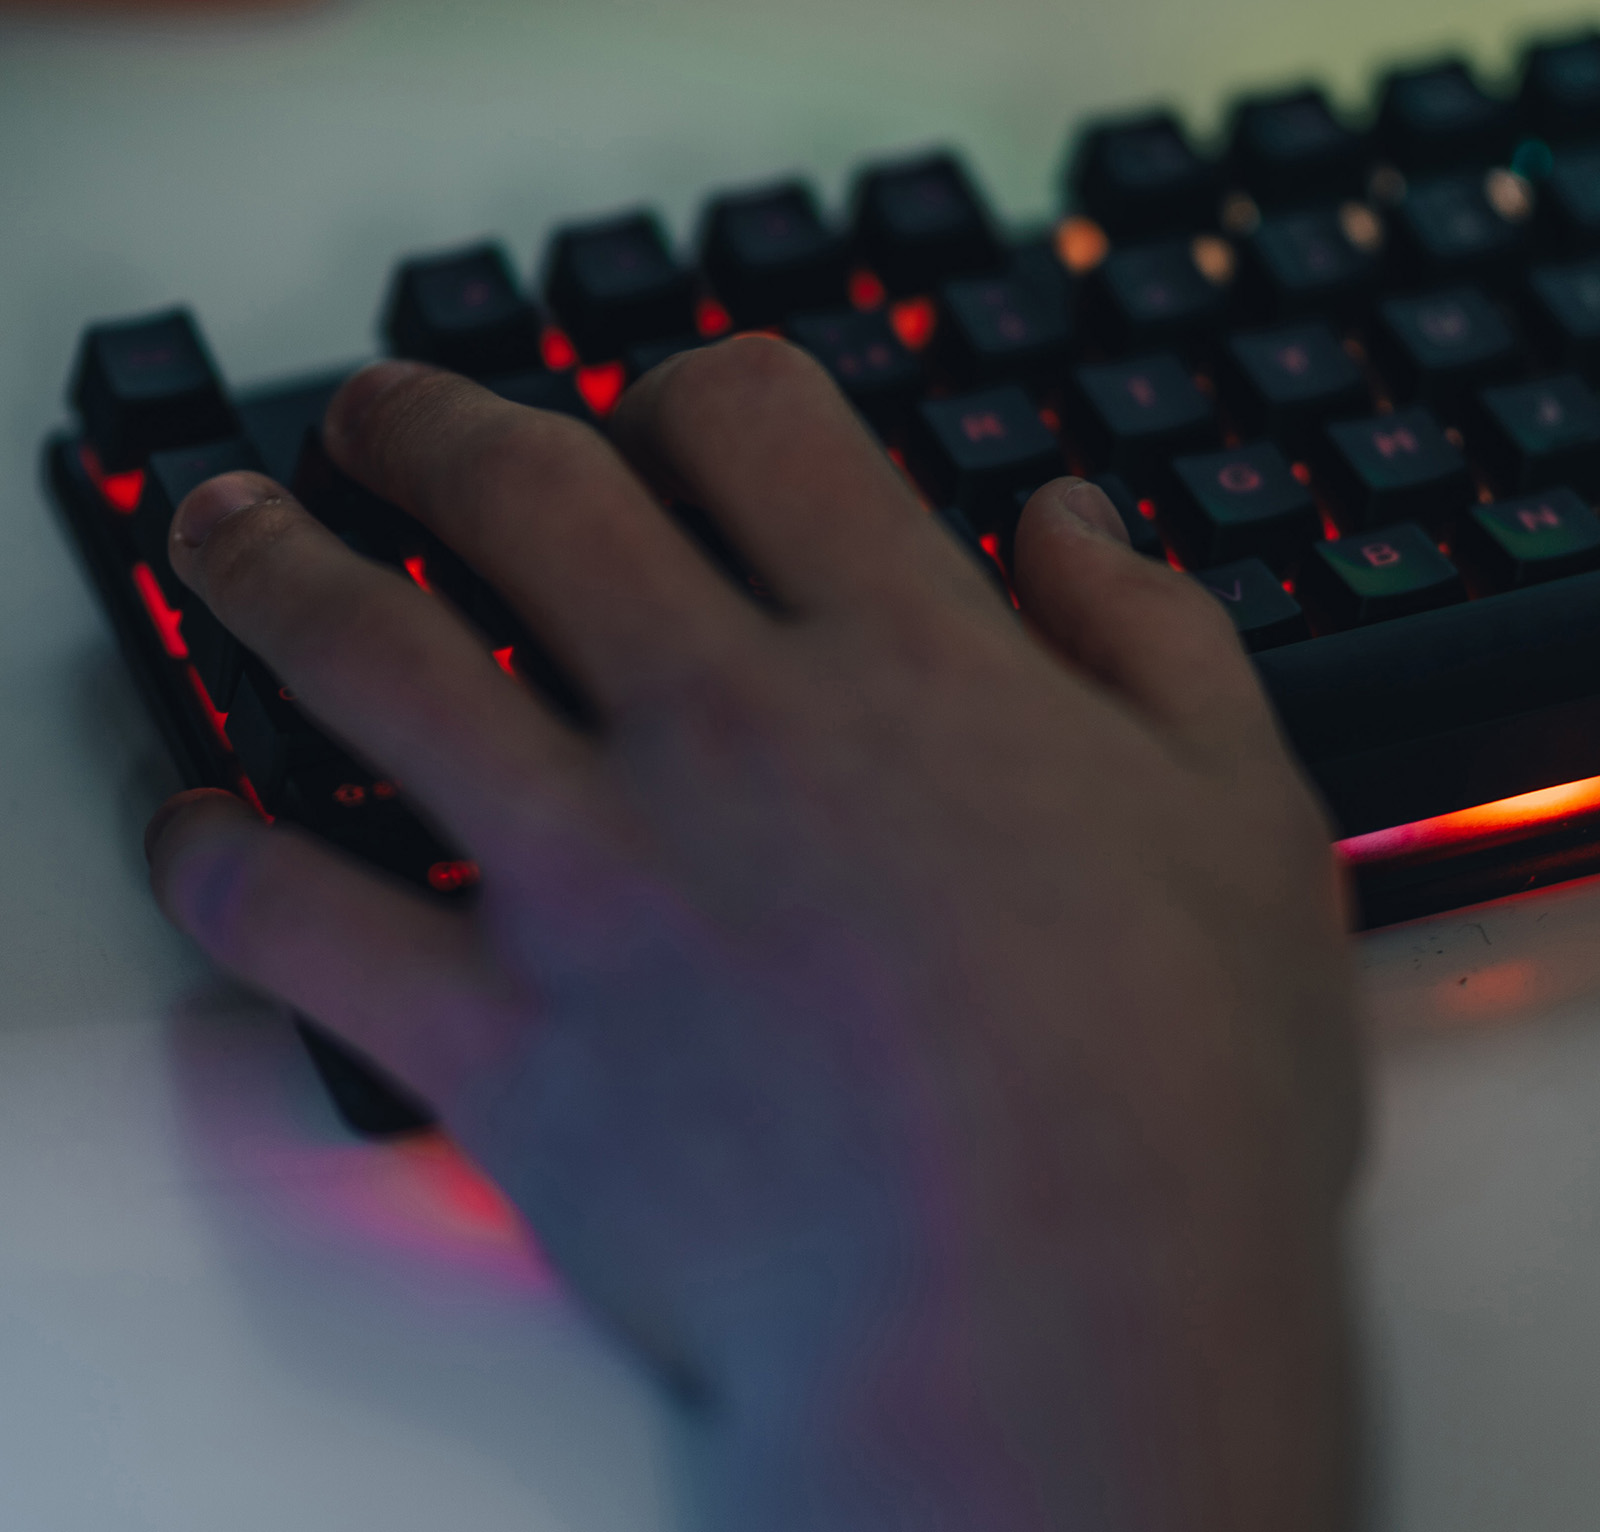 Illustration image of a hand on a gamer keyboard